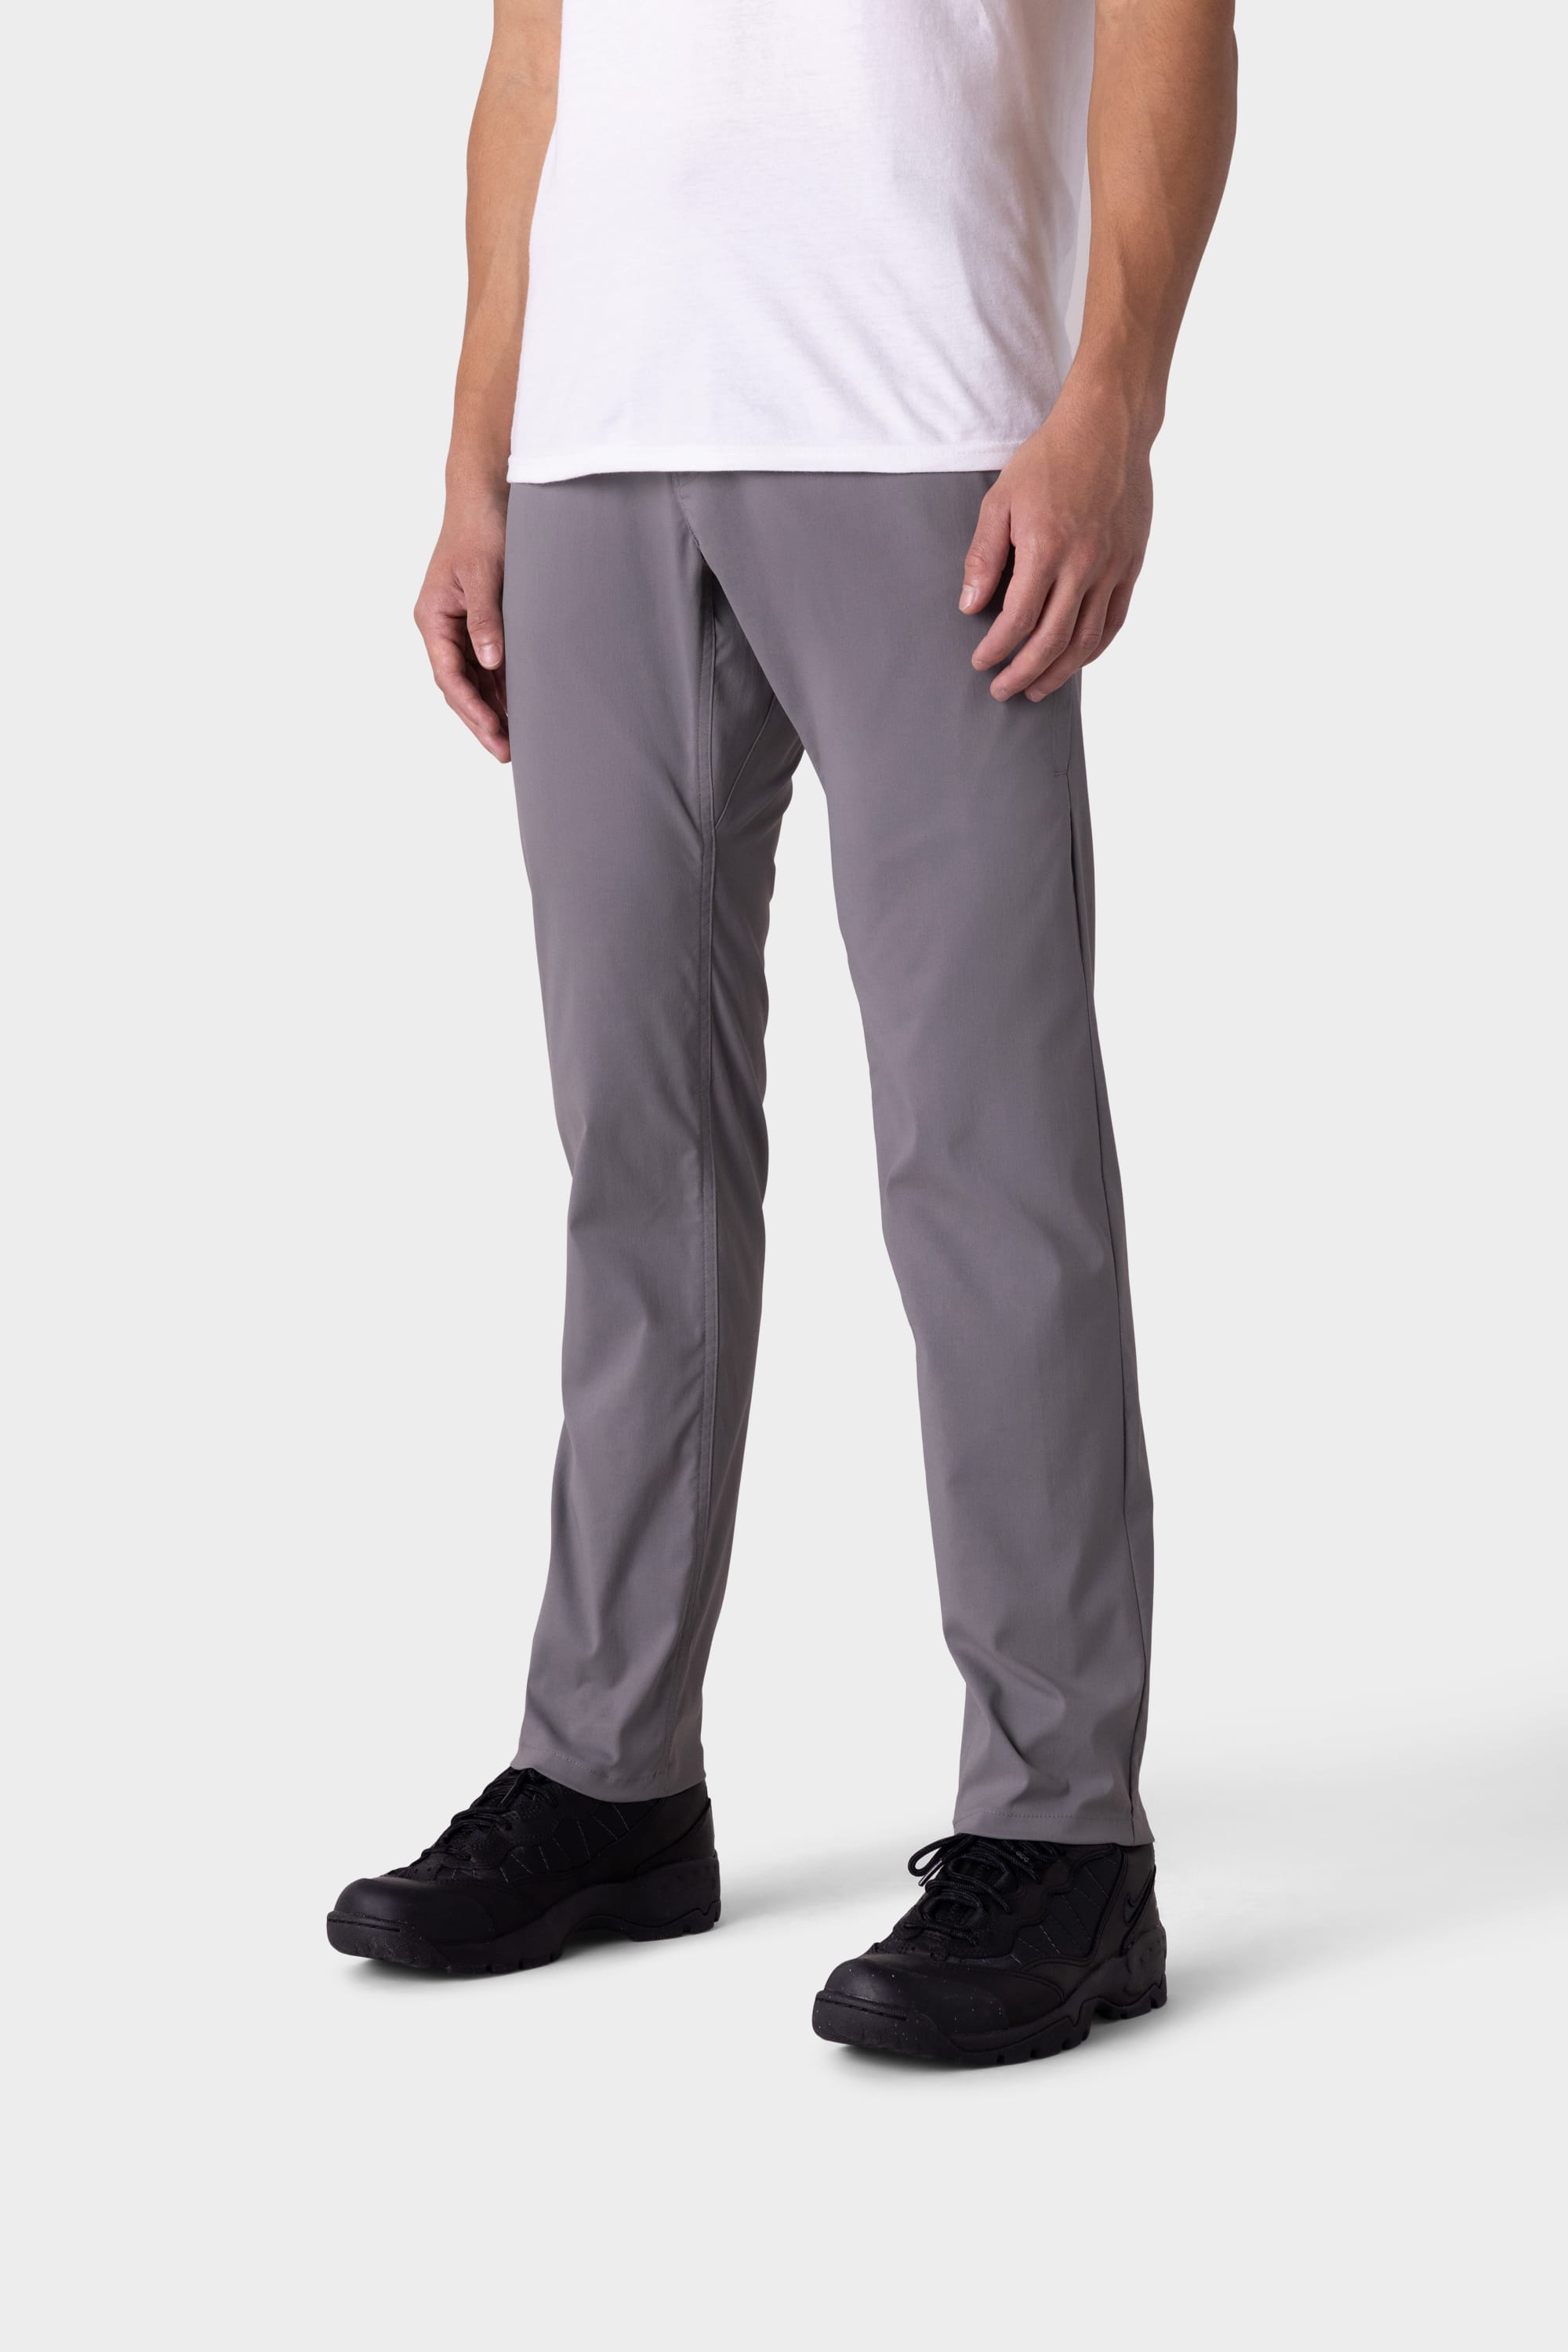 686 Men's Everywhere Pant - Relaxed Fit